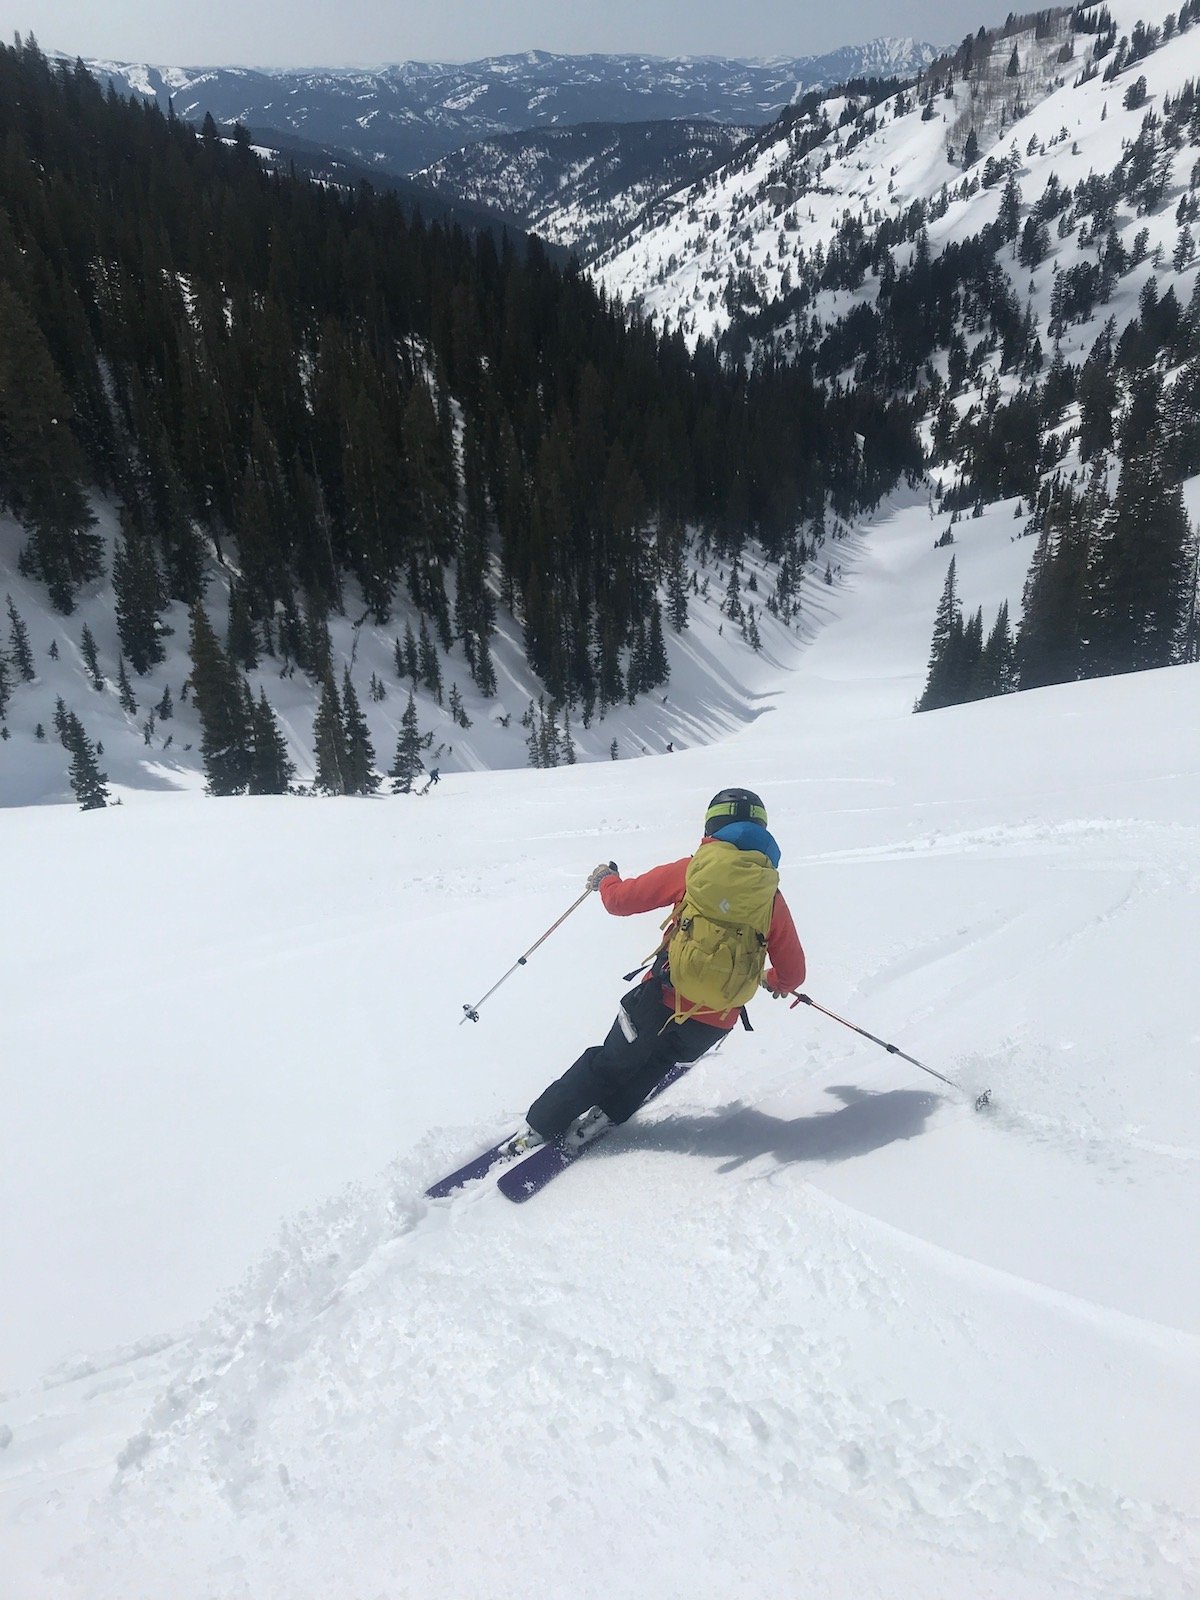 Person wearing a backpack backcountry skis down hill toward pines below